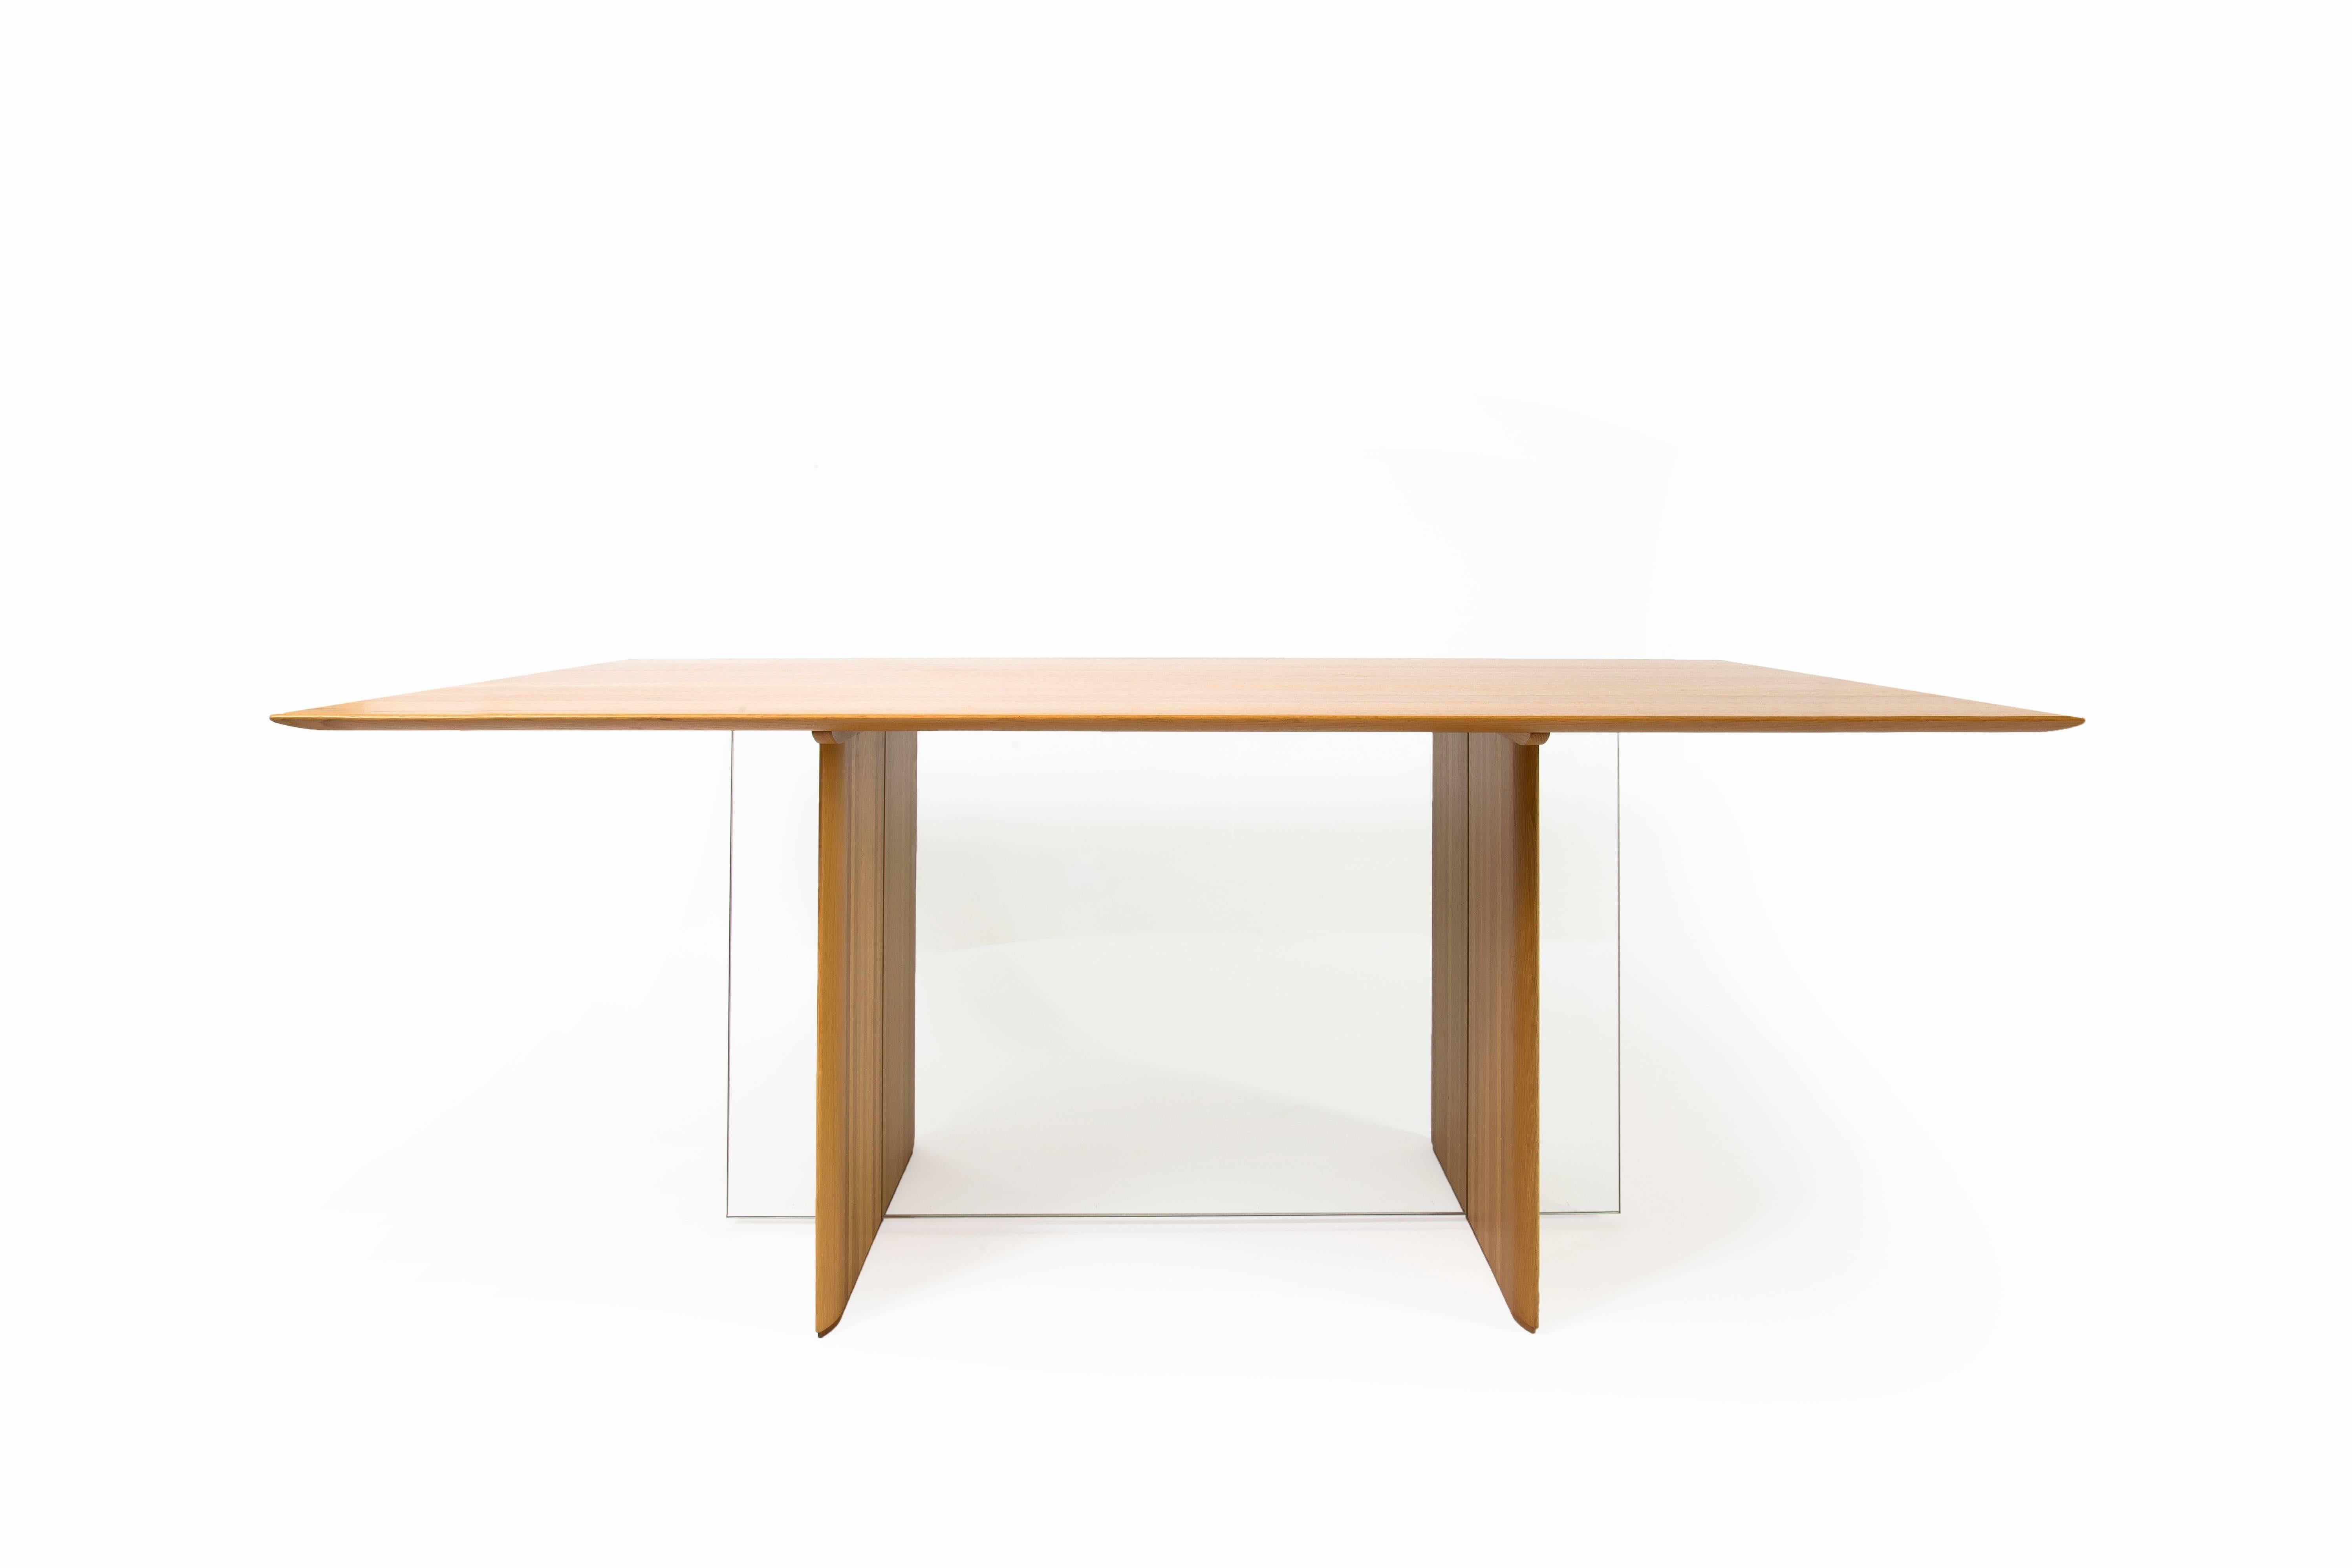 Elegant "Iris" table (or desk) executed by the Van den Berghe Pauvers studio in Belgium. Solid oak and clear glass.